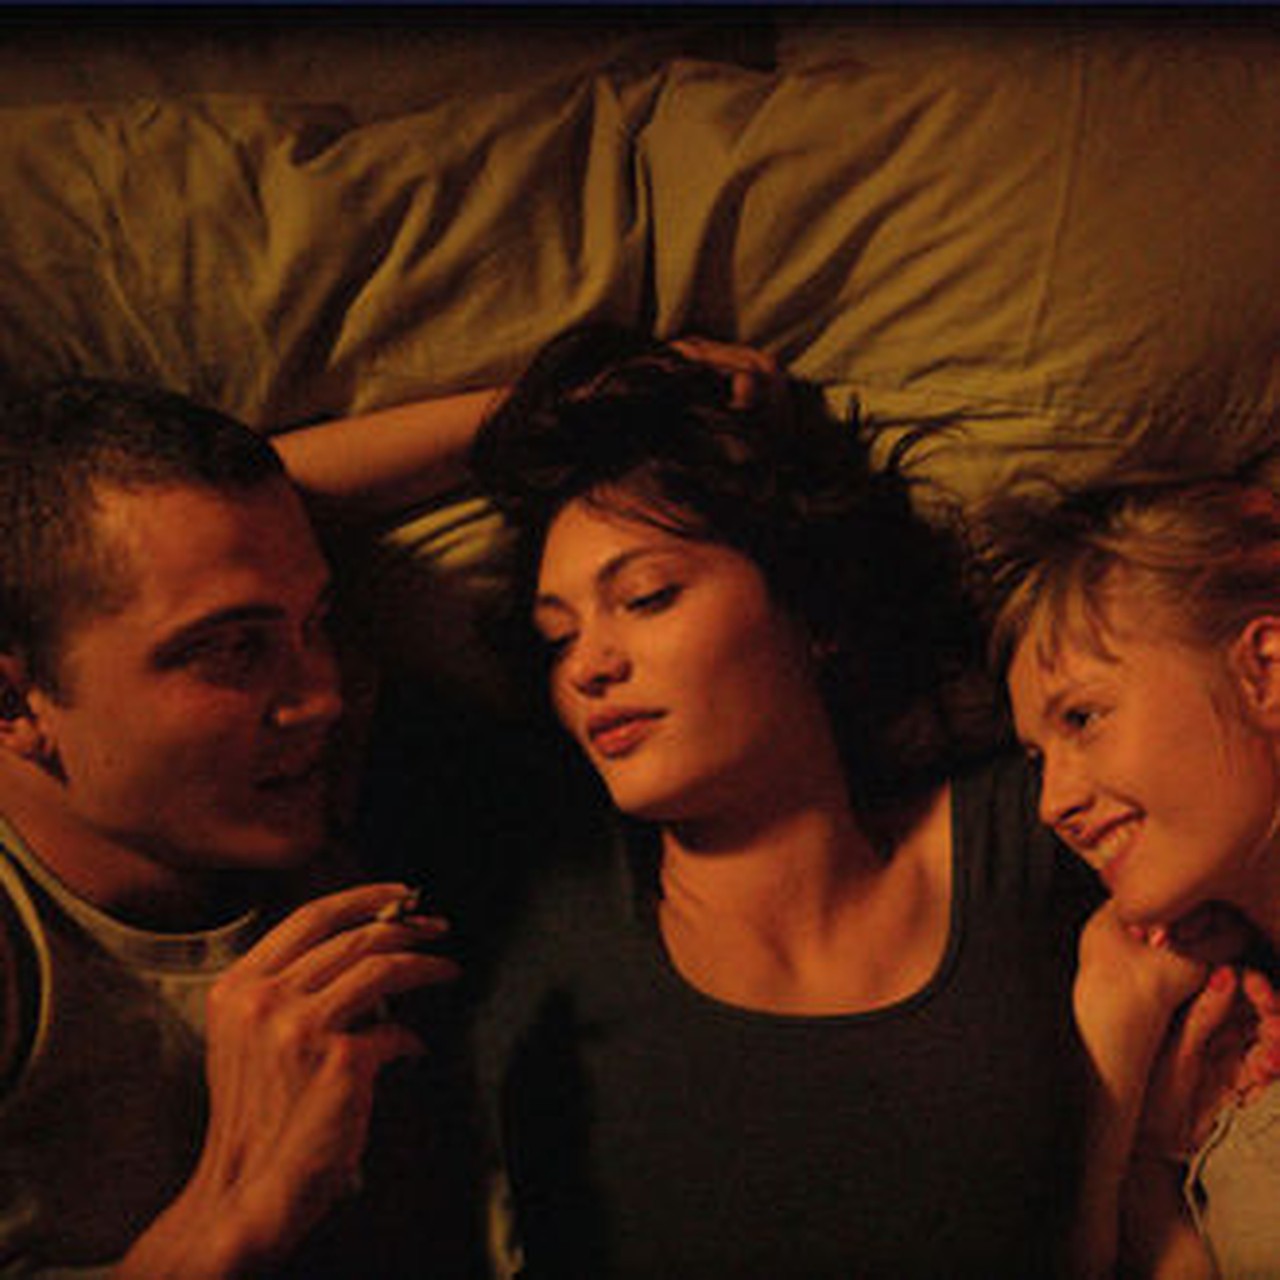 Delflo Mubi - Love's Astral Spy: An Interview with Gasper NoÃ© on Notebook | MUBI